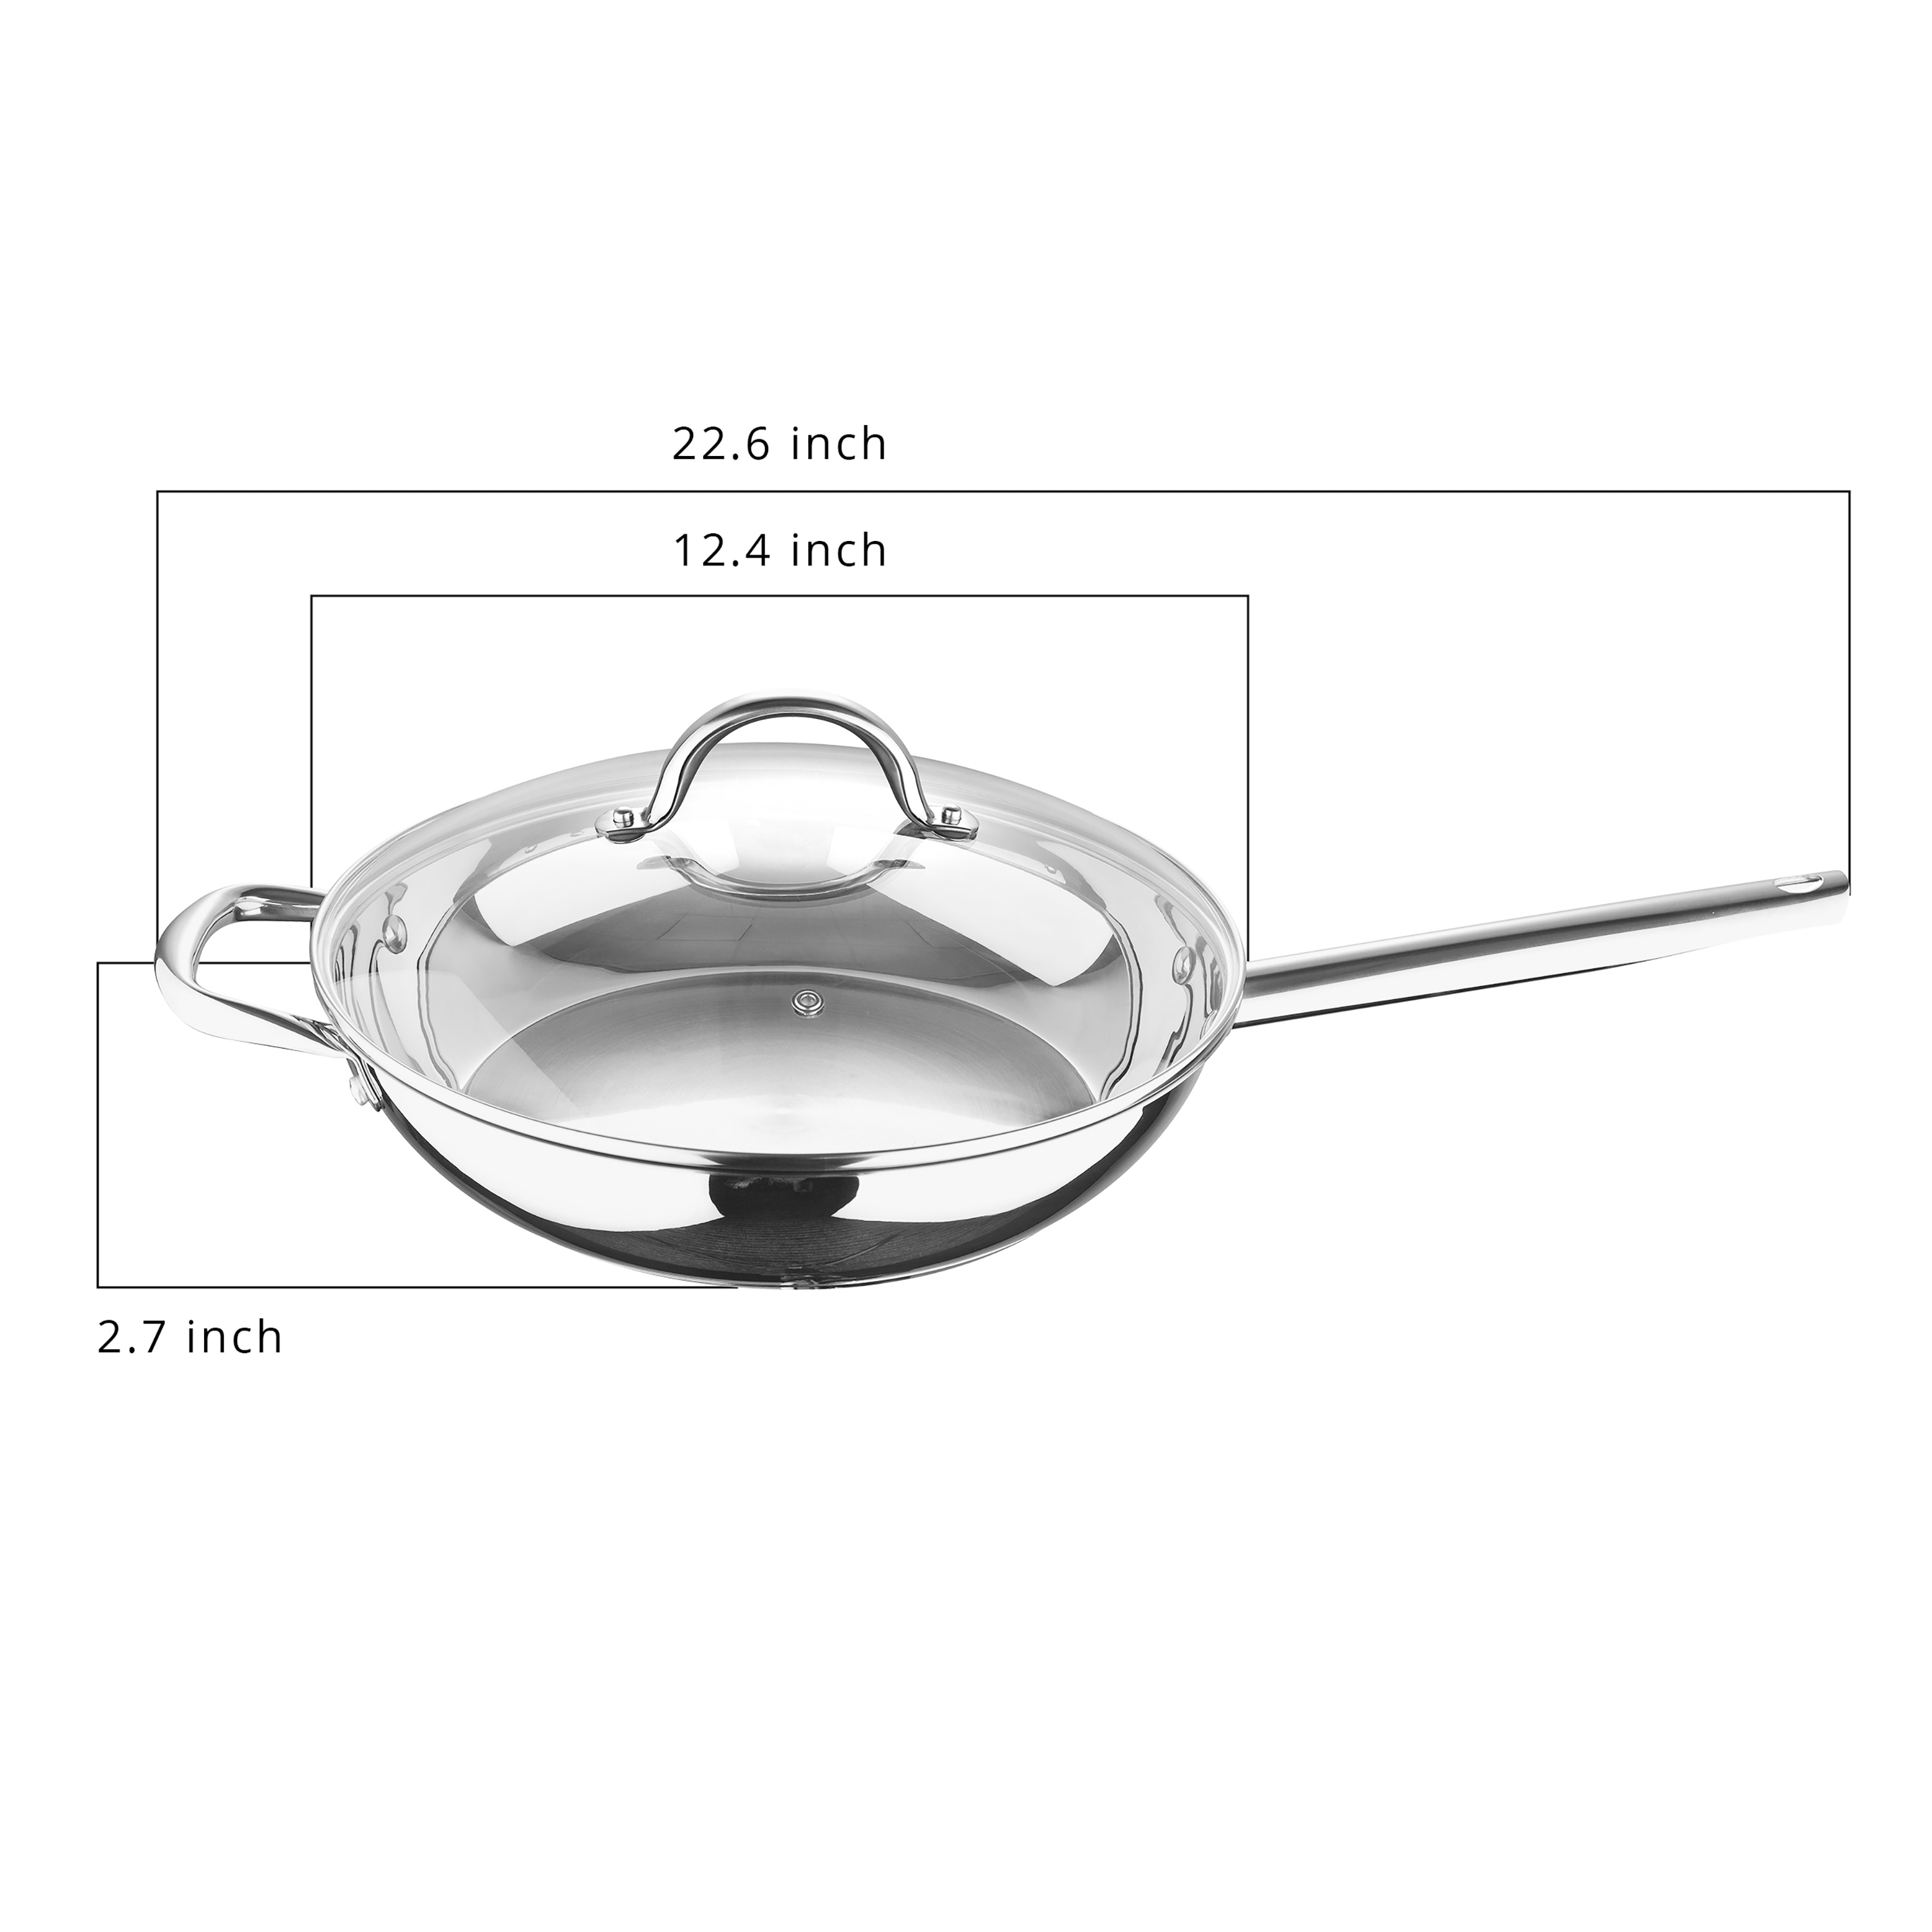 https://ak1.ostkcdn.com/images/products/is/images/direct/369ddaf3924ef5a0e63dd9139864098141ebc687/Bergner-BGUS10115STS-12-Inch-Fry-Pan-Stainless-Steel-Dishwasher-Safe-Induction-Ready-with-Lid.jpg